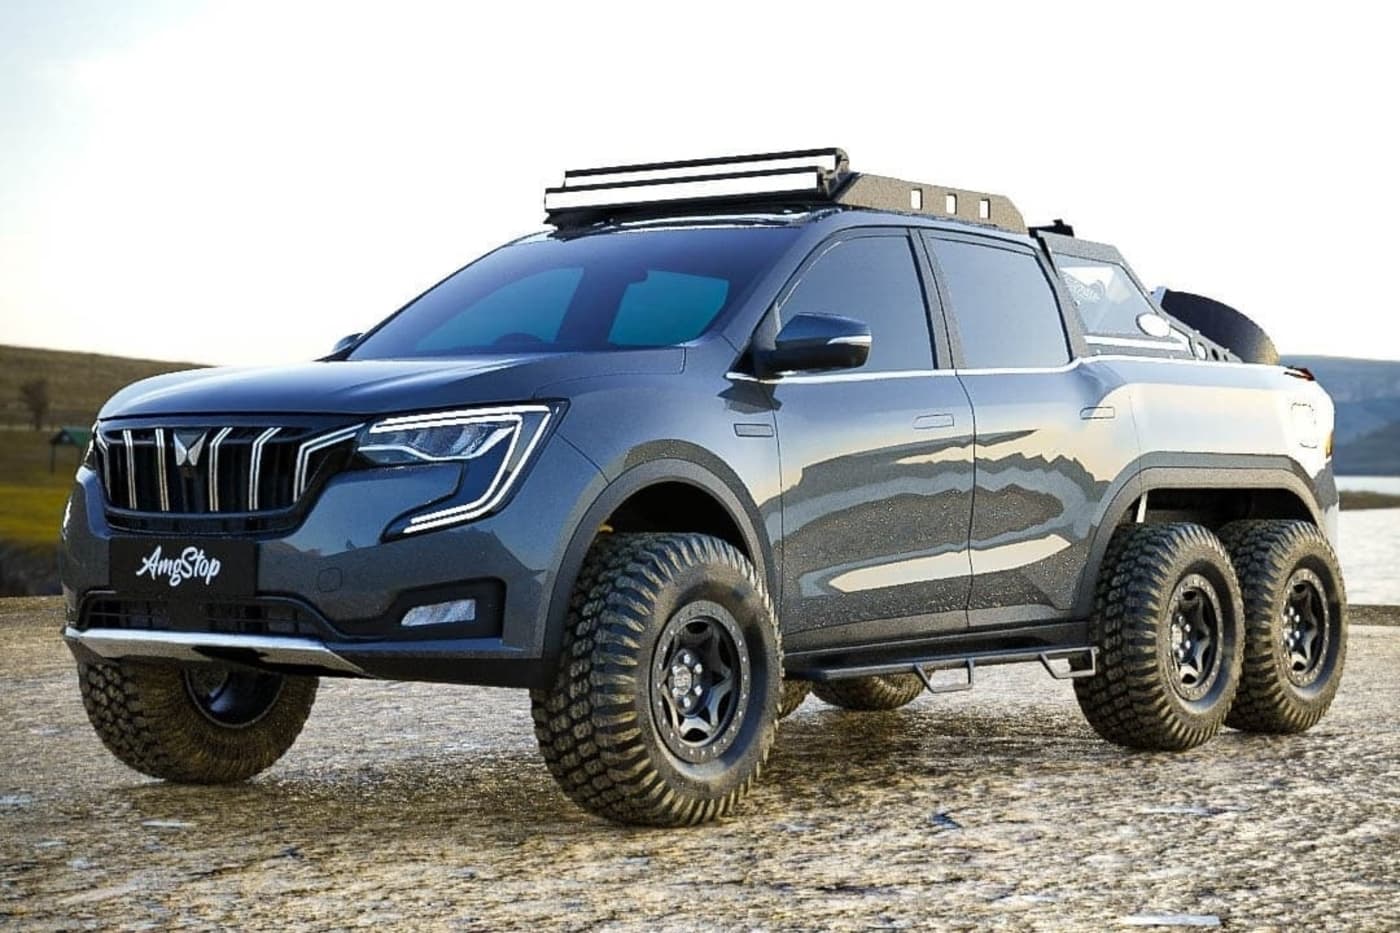 Mahindra Xuv700 6x6 Concept Truck Looks Ready For The Apocalypse